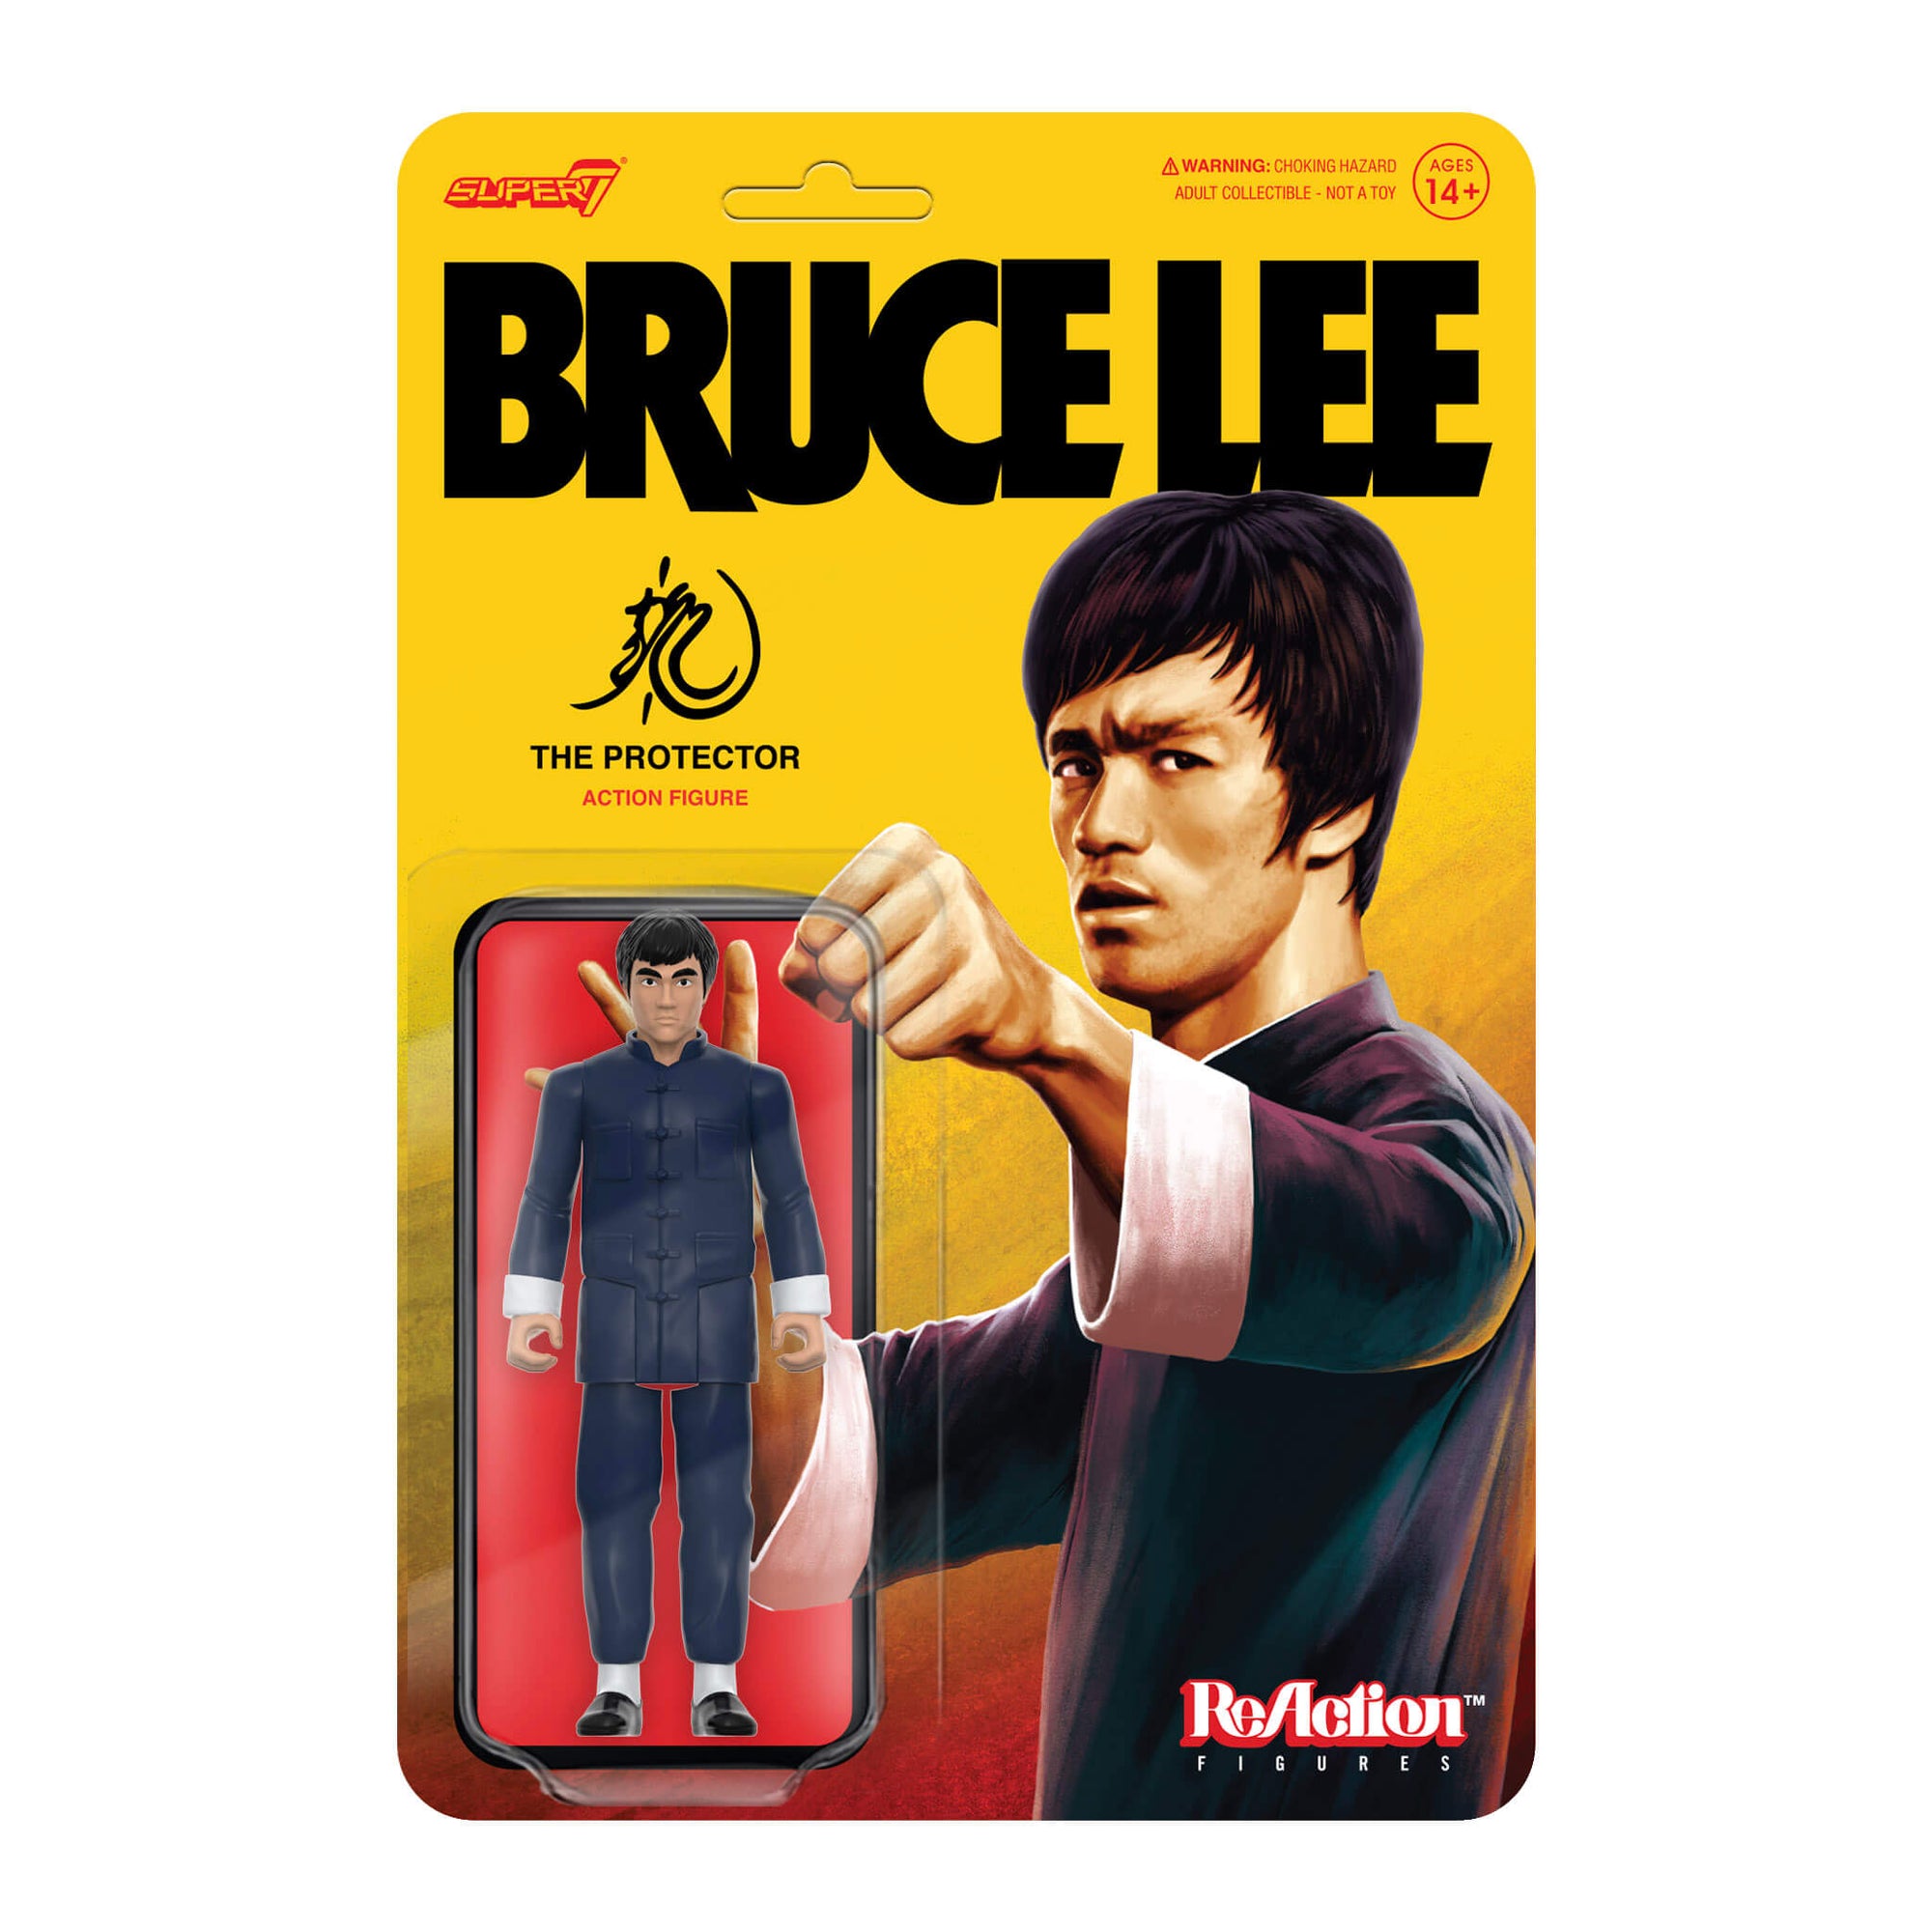 Bruce Lee (The Protector) - Bruce Lee by Super7